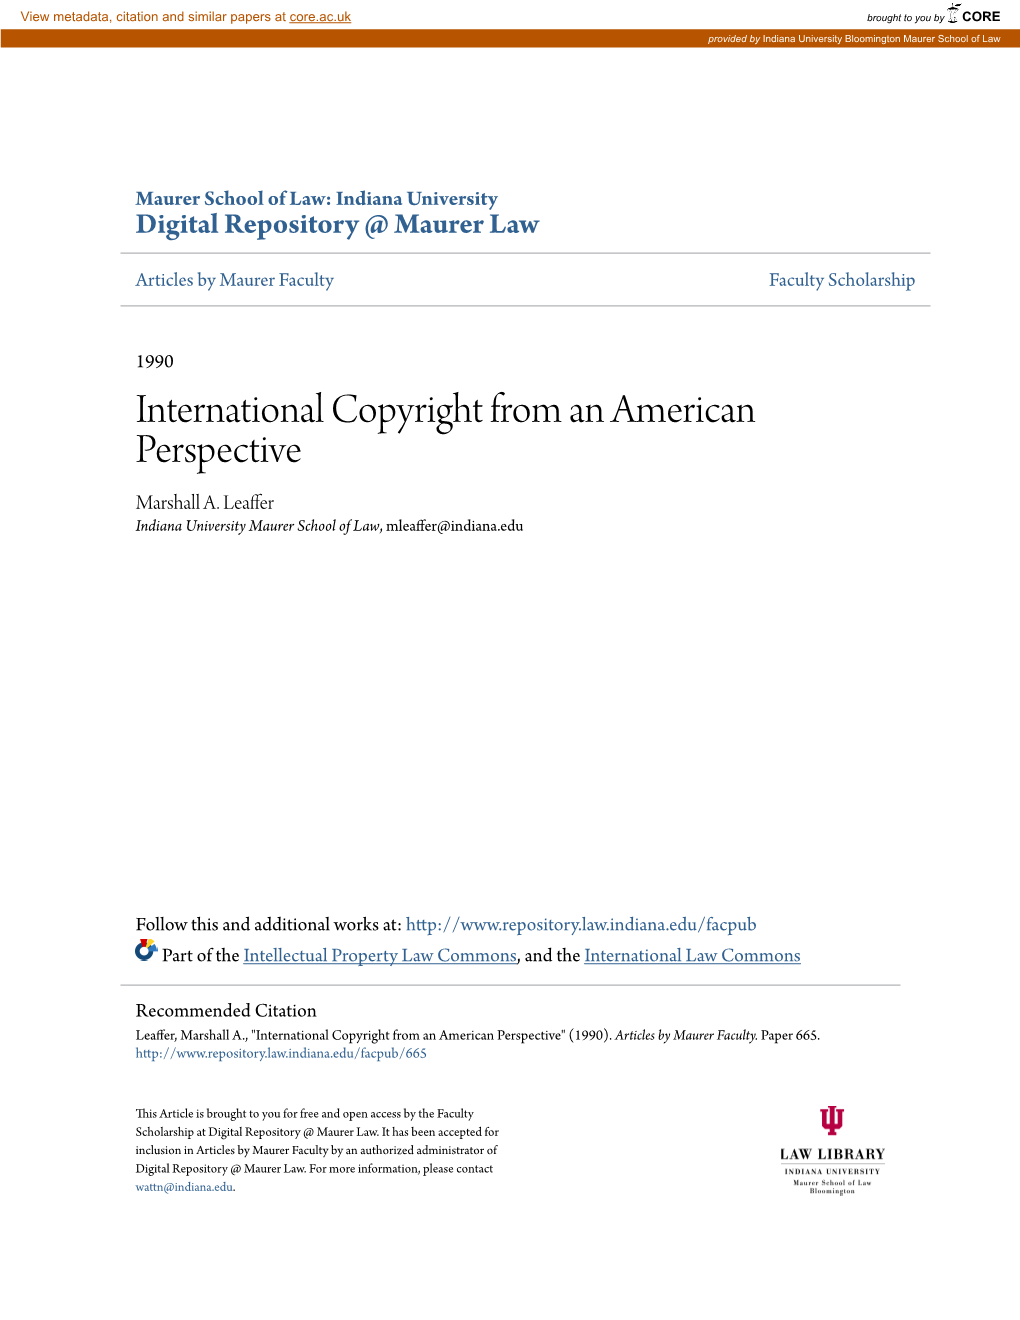 International Copyright from an American Perspective Marshall A